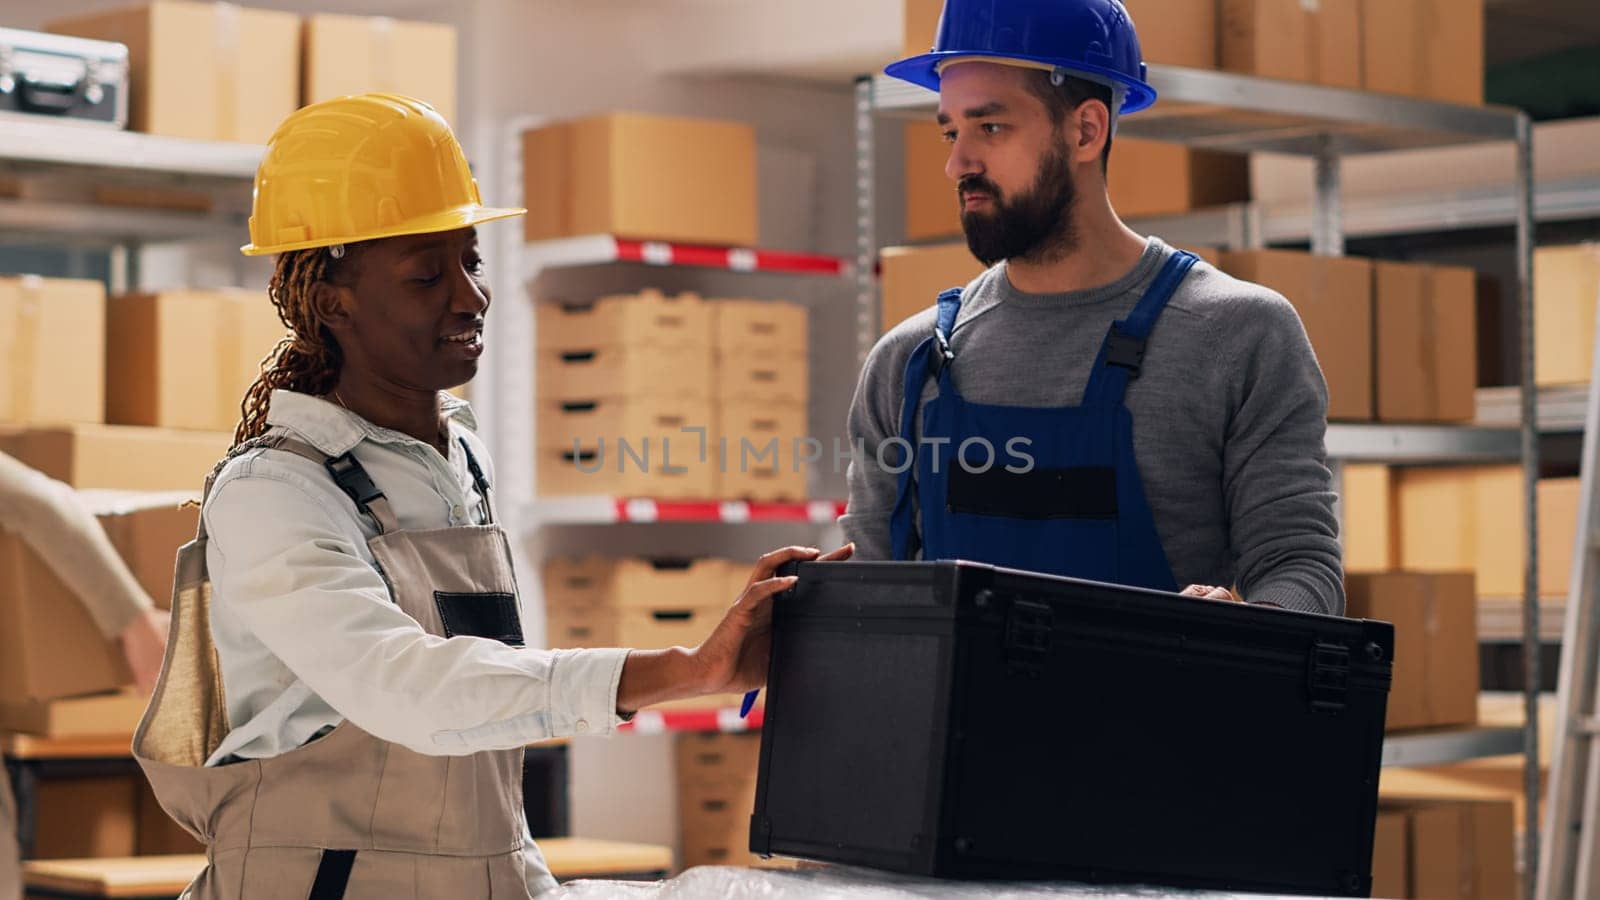 Multiethnic team of people examining list of products on files, talking about merchandise stock for inventory. Man and woman in overalls checking goods in storage room depot, industrial work.